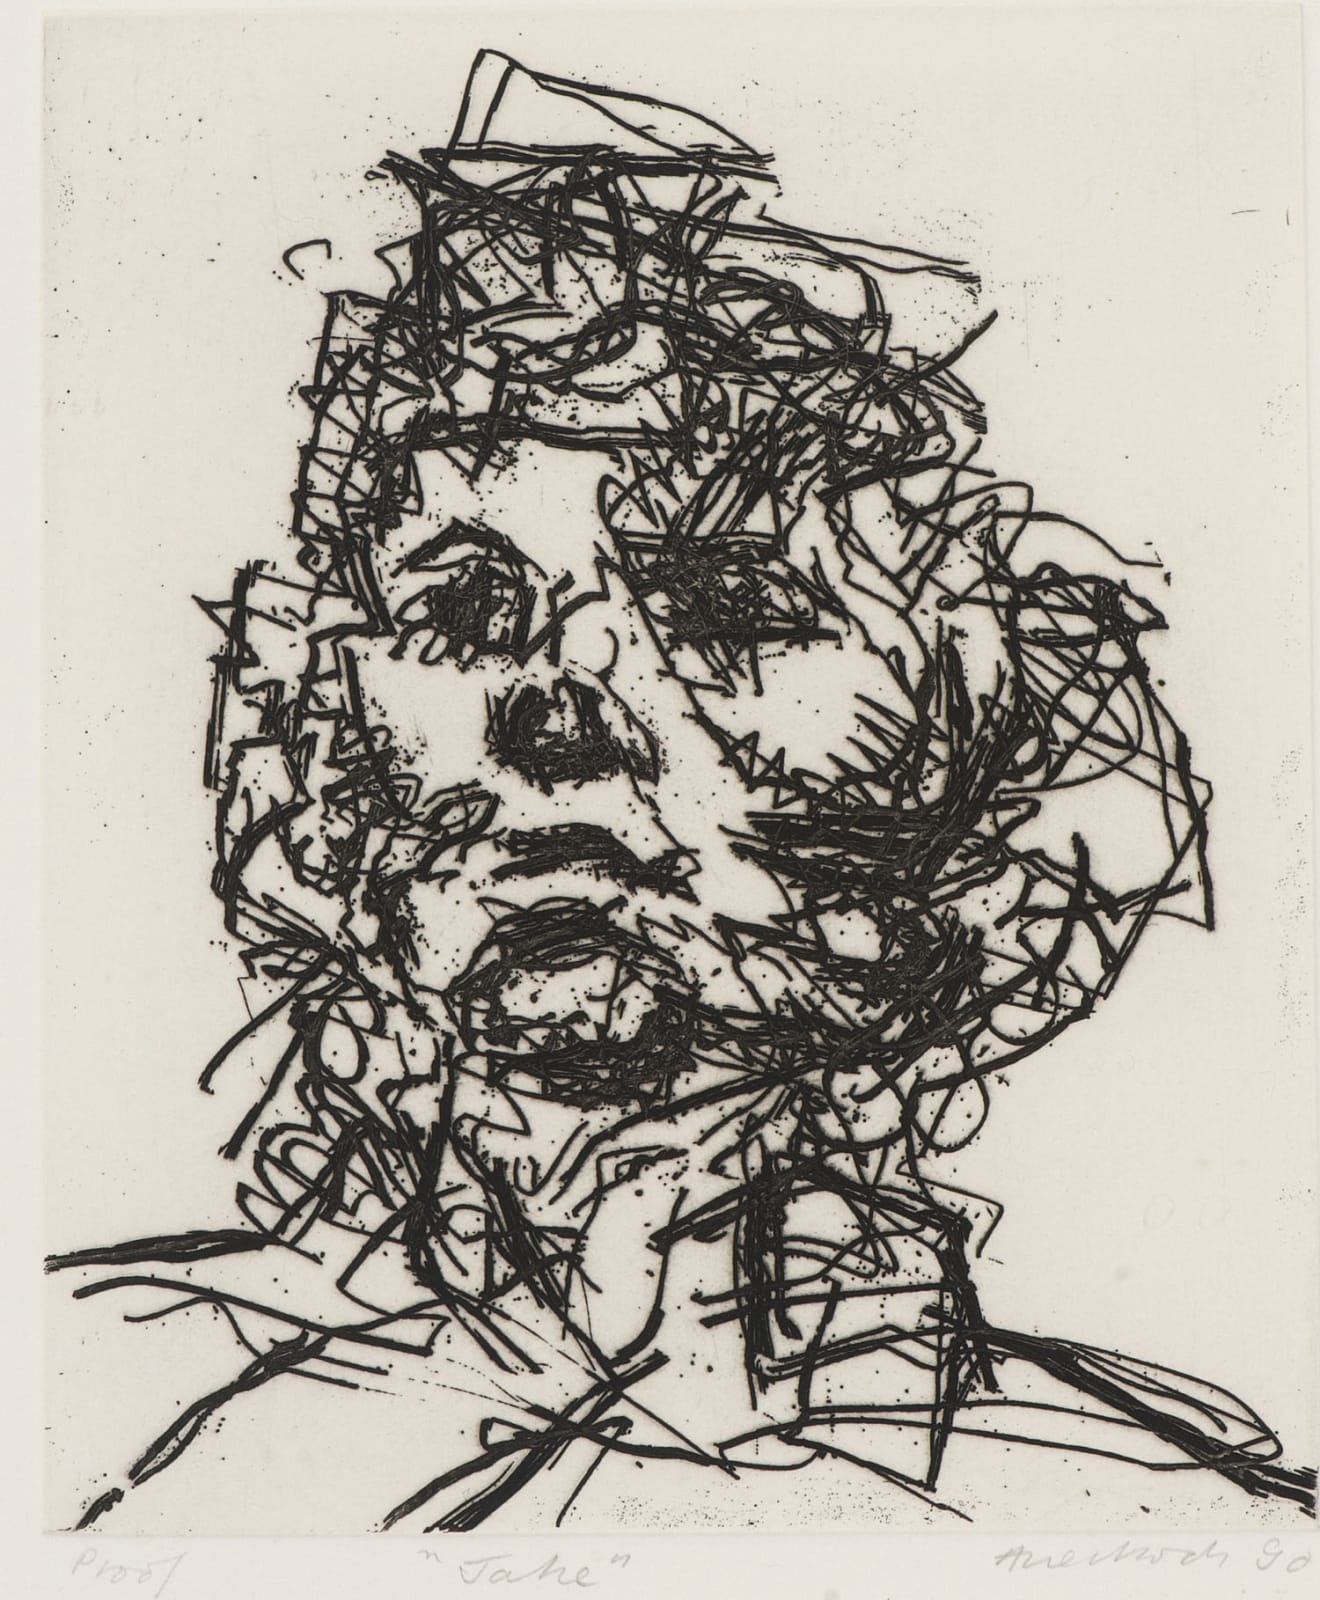 Frank Auerbach (1931-) Jake, Series: Part of Seven Portraits 1990 Etching, printed on Somerset white paper, artist's proof outside the published edition of 50 20 x 16.5 cm Ben Uri Collection © Frank Auerbach, courtesy Marlborough Fine Art